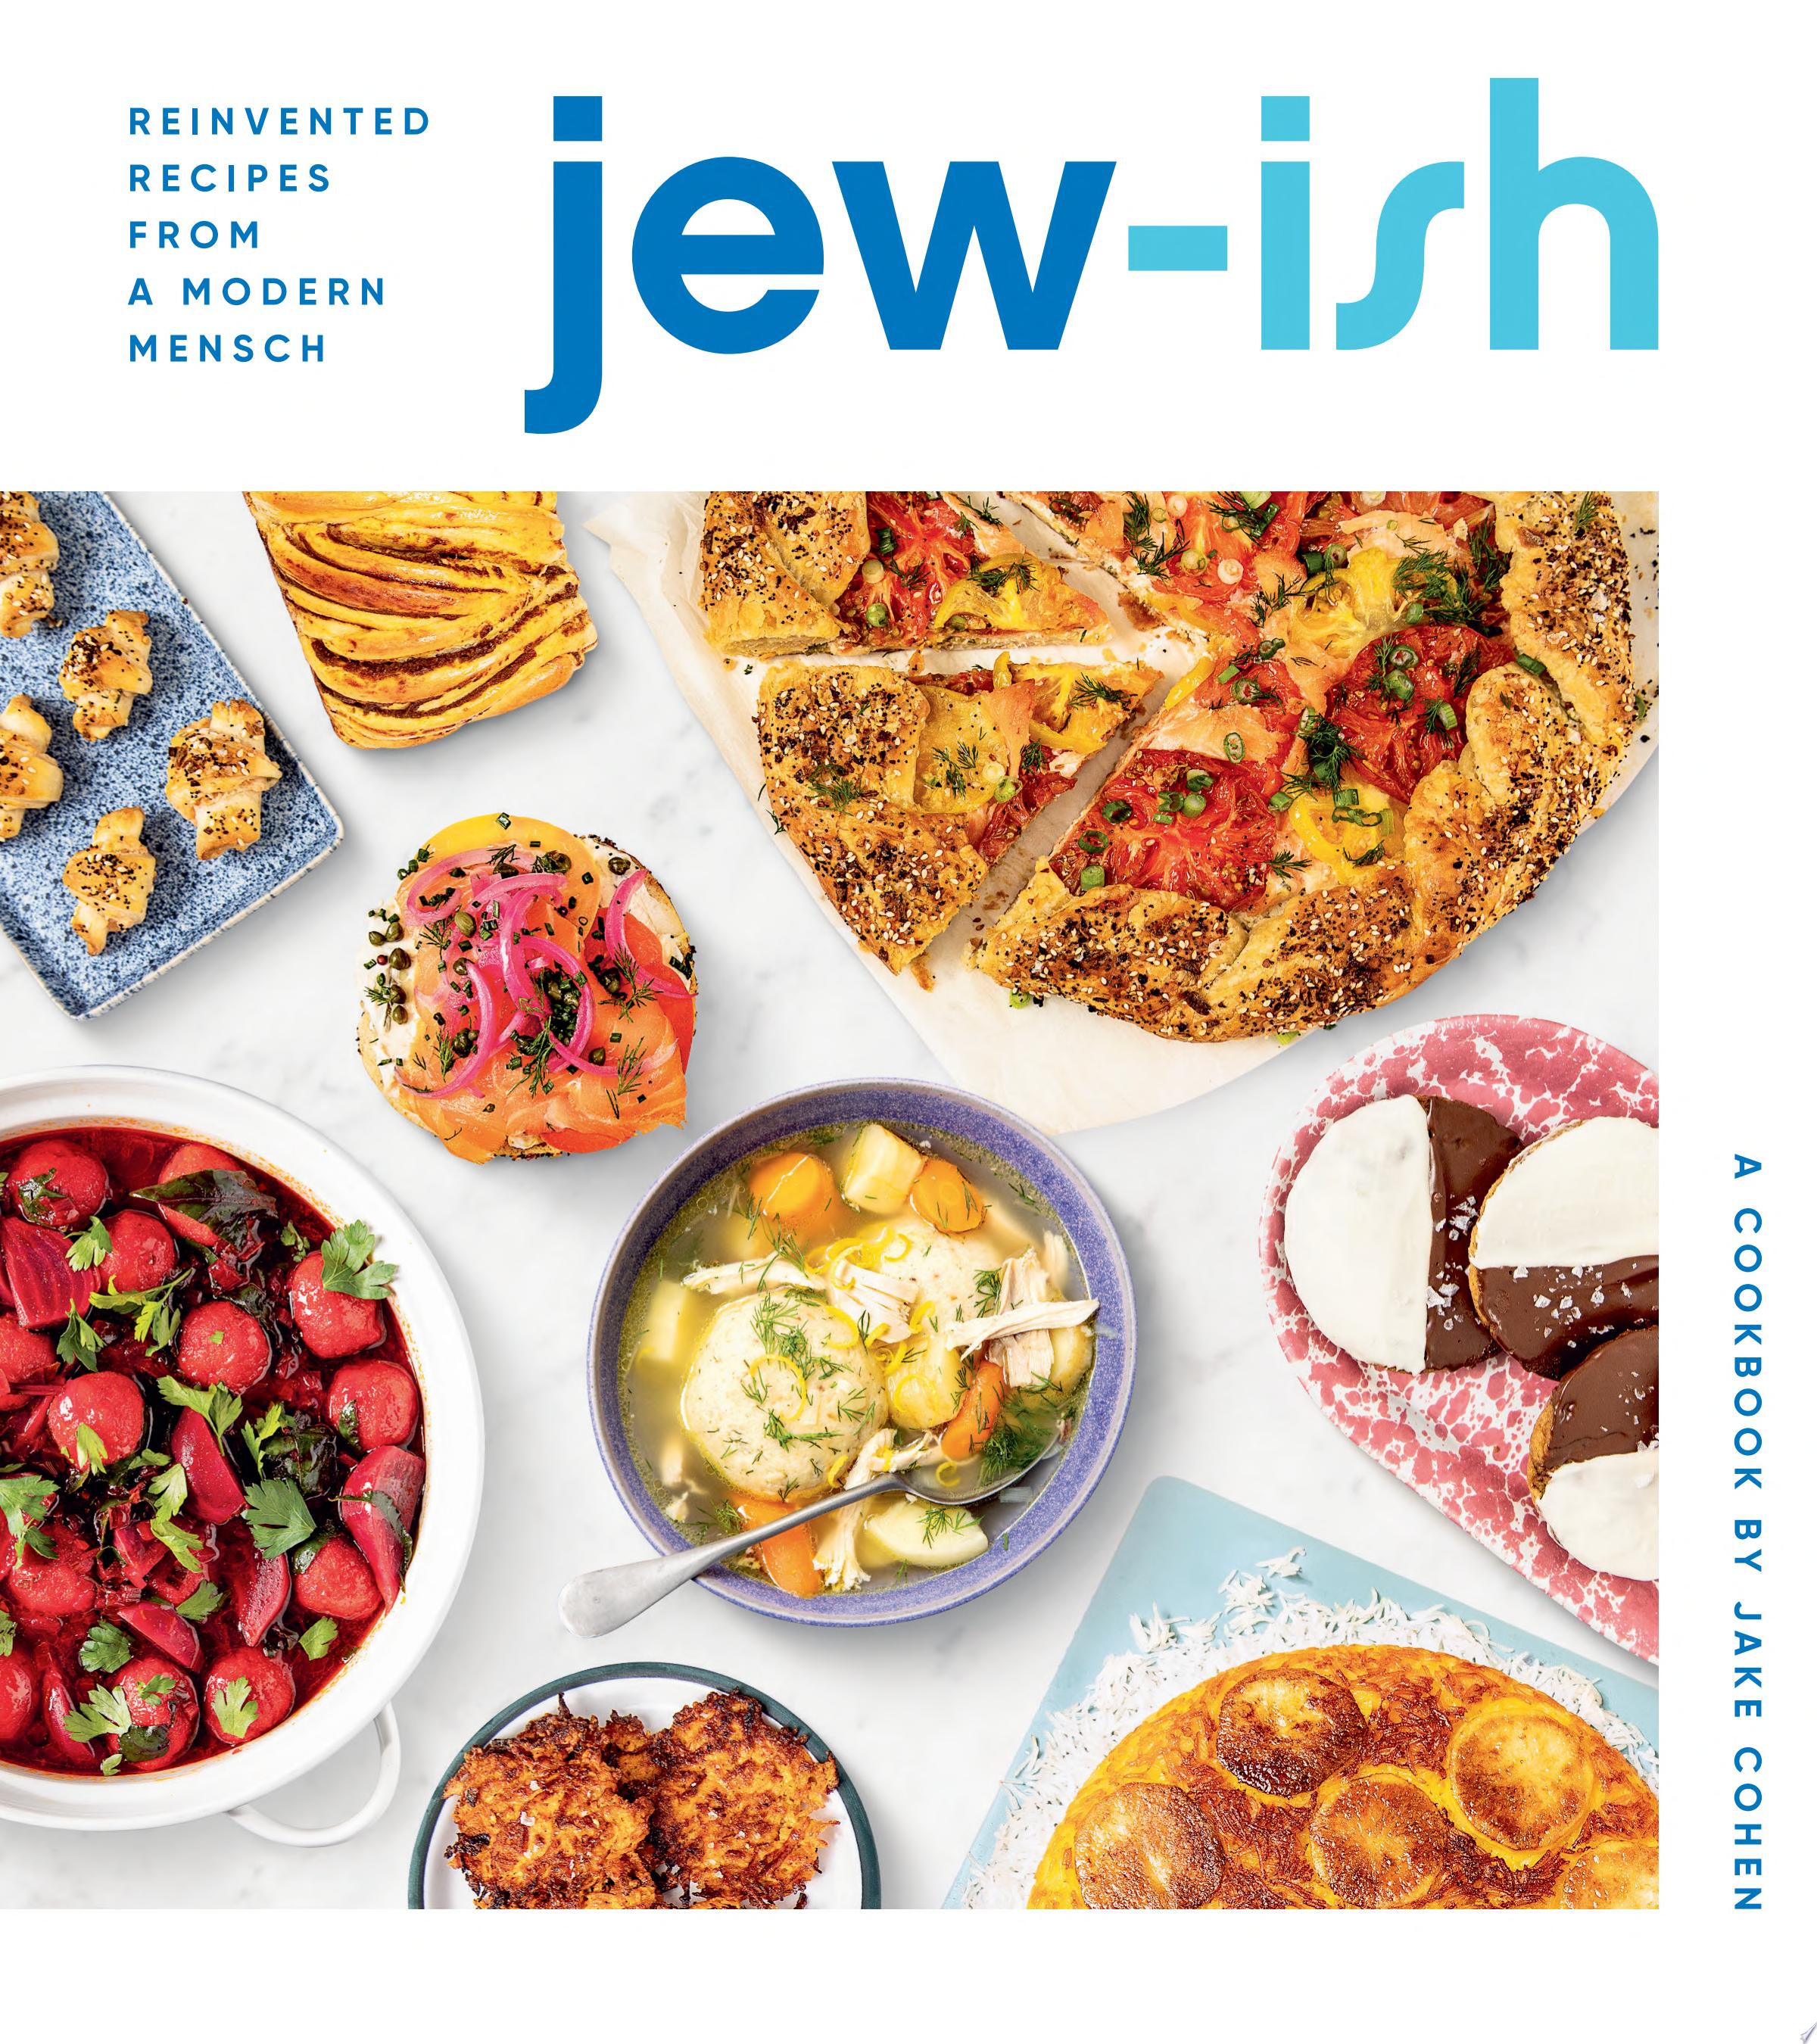 Image for "Jew-Ish: a Cookbook"